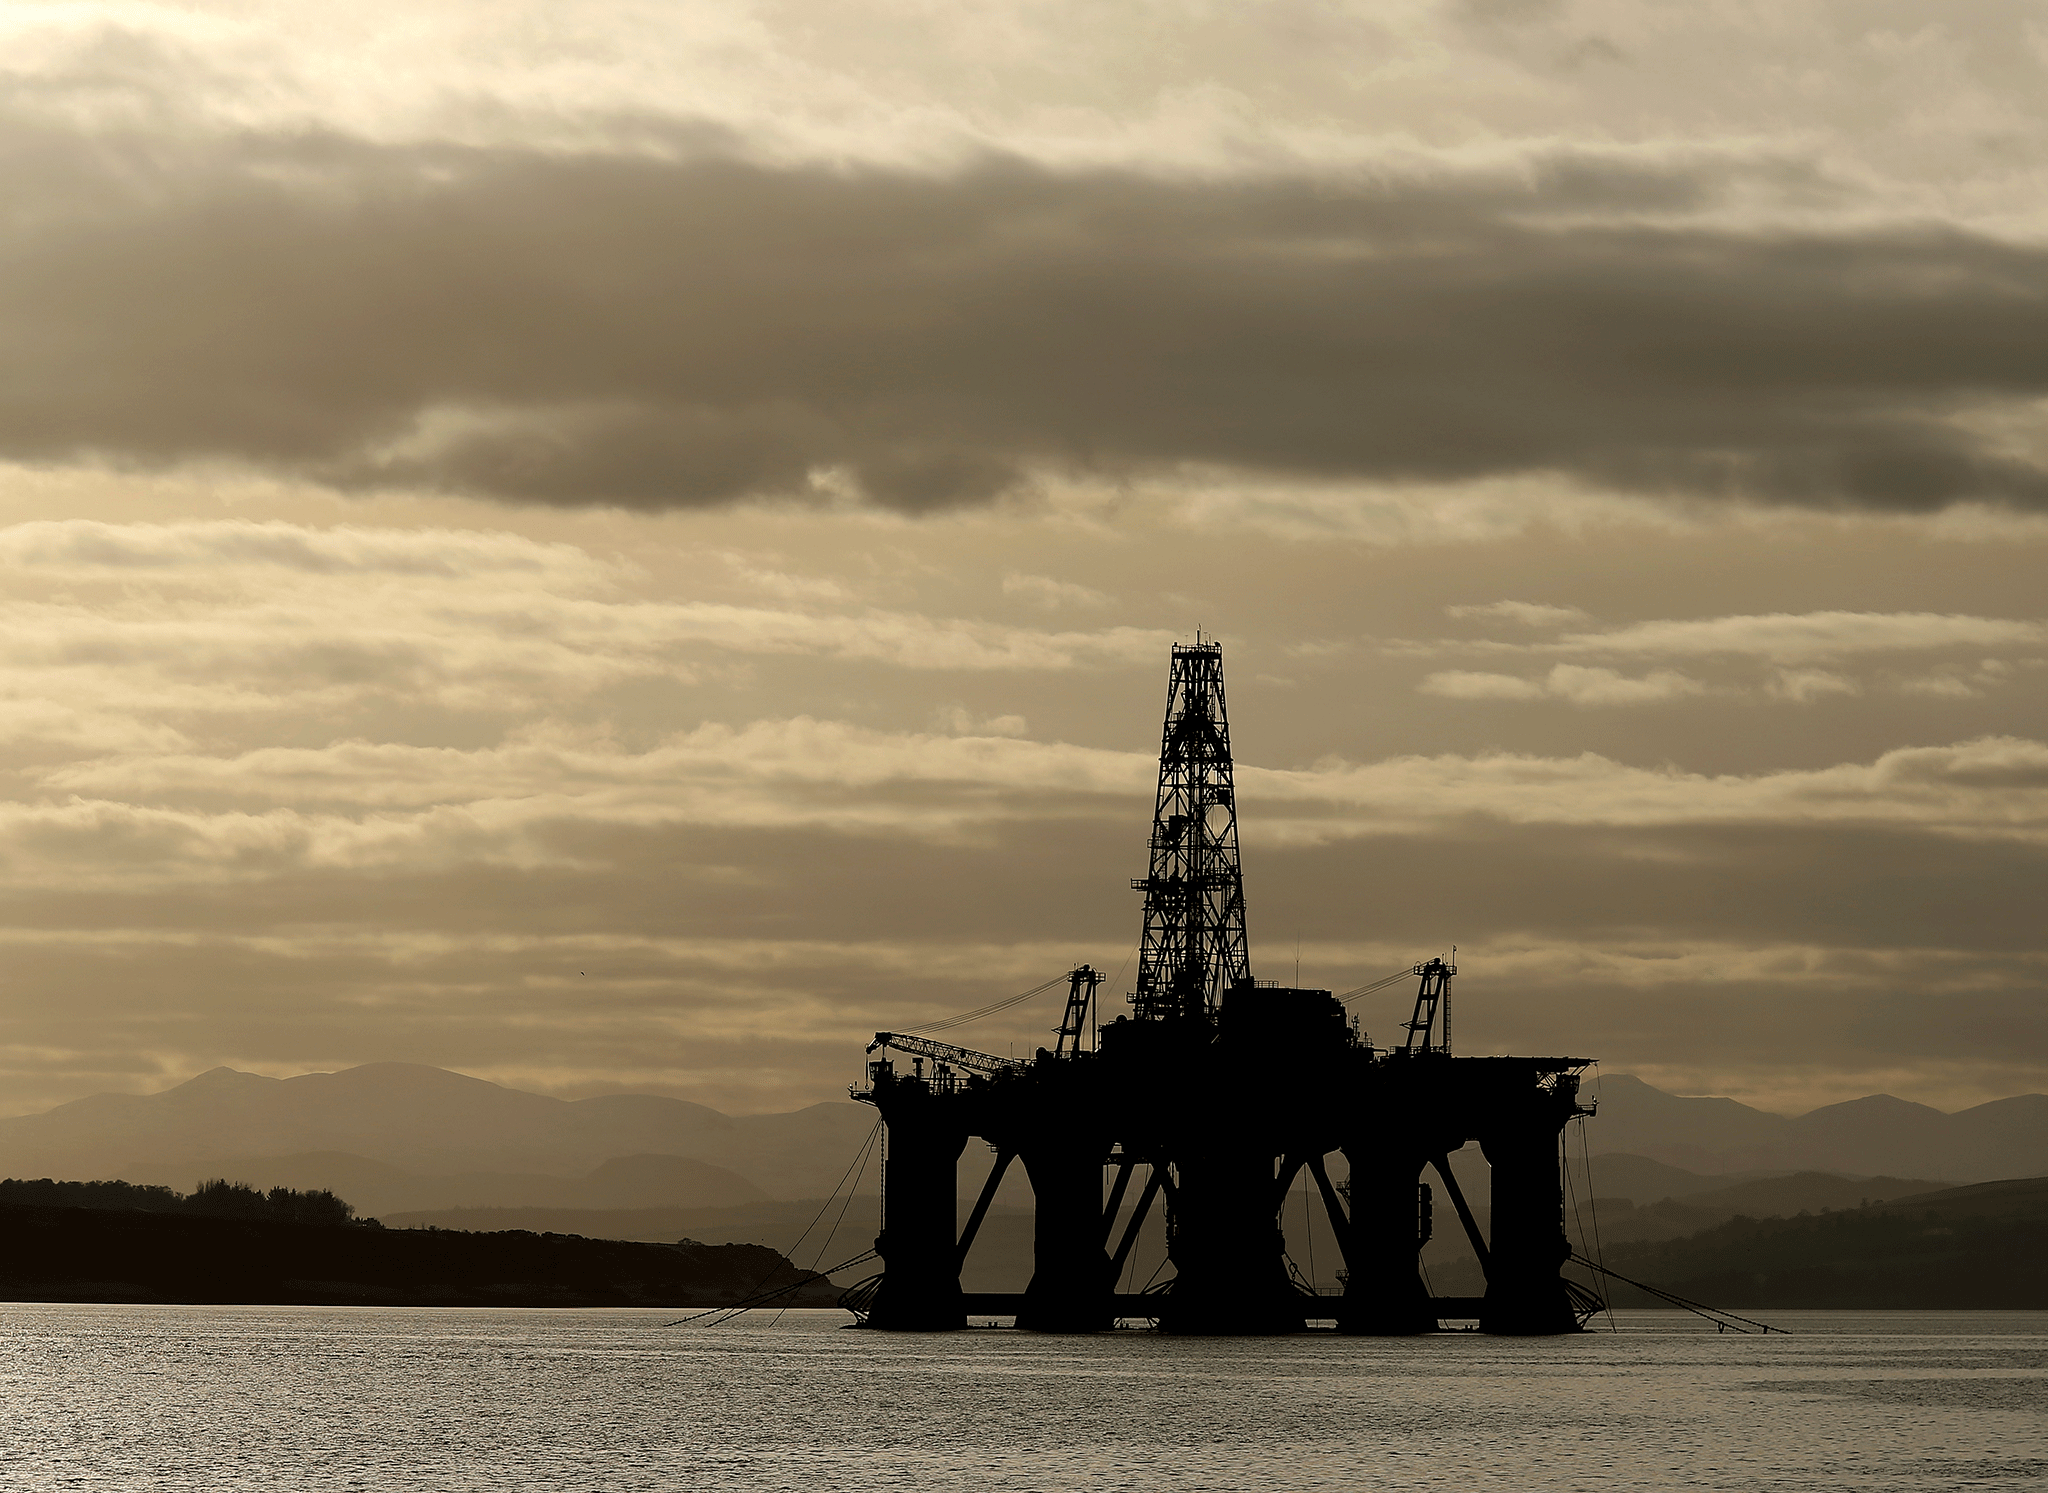 Oil companies will be given £5bn in tax breaks to decommission North Sea rigs by the end of 2021